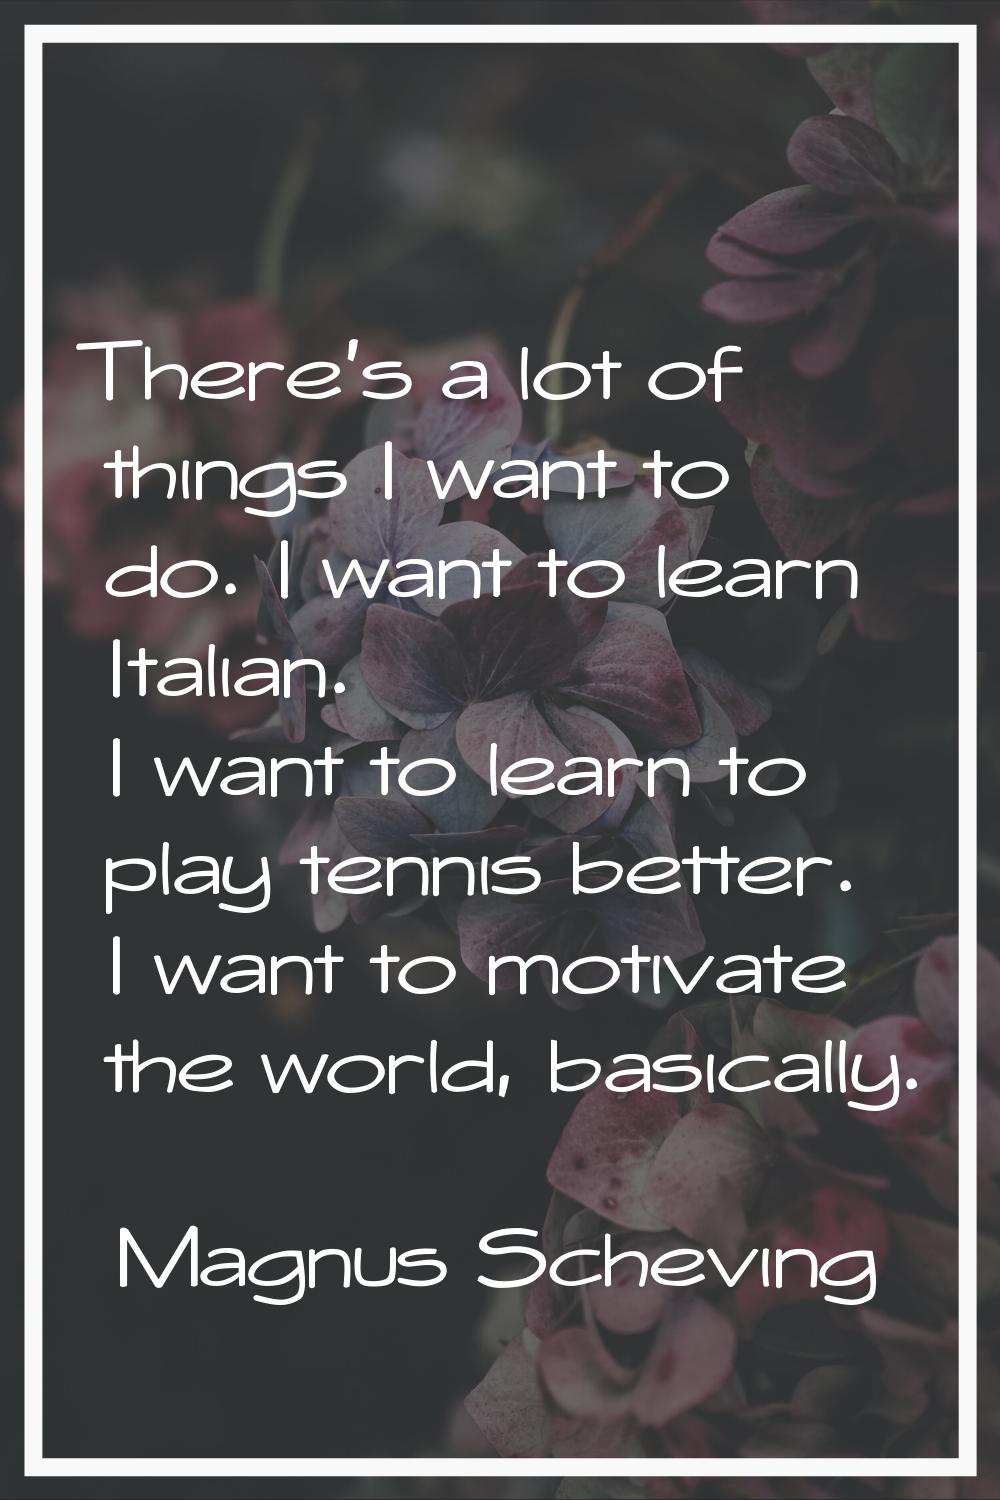 There's a lot of things I want to do. I want to learn Italian. I want to learn to play tennis bette